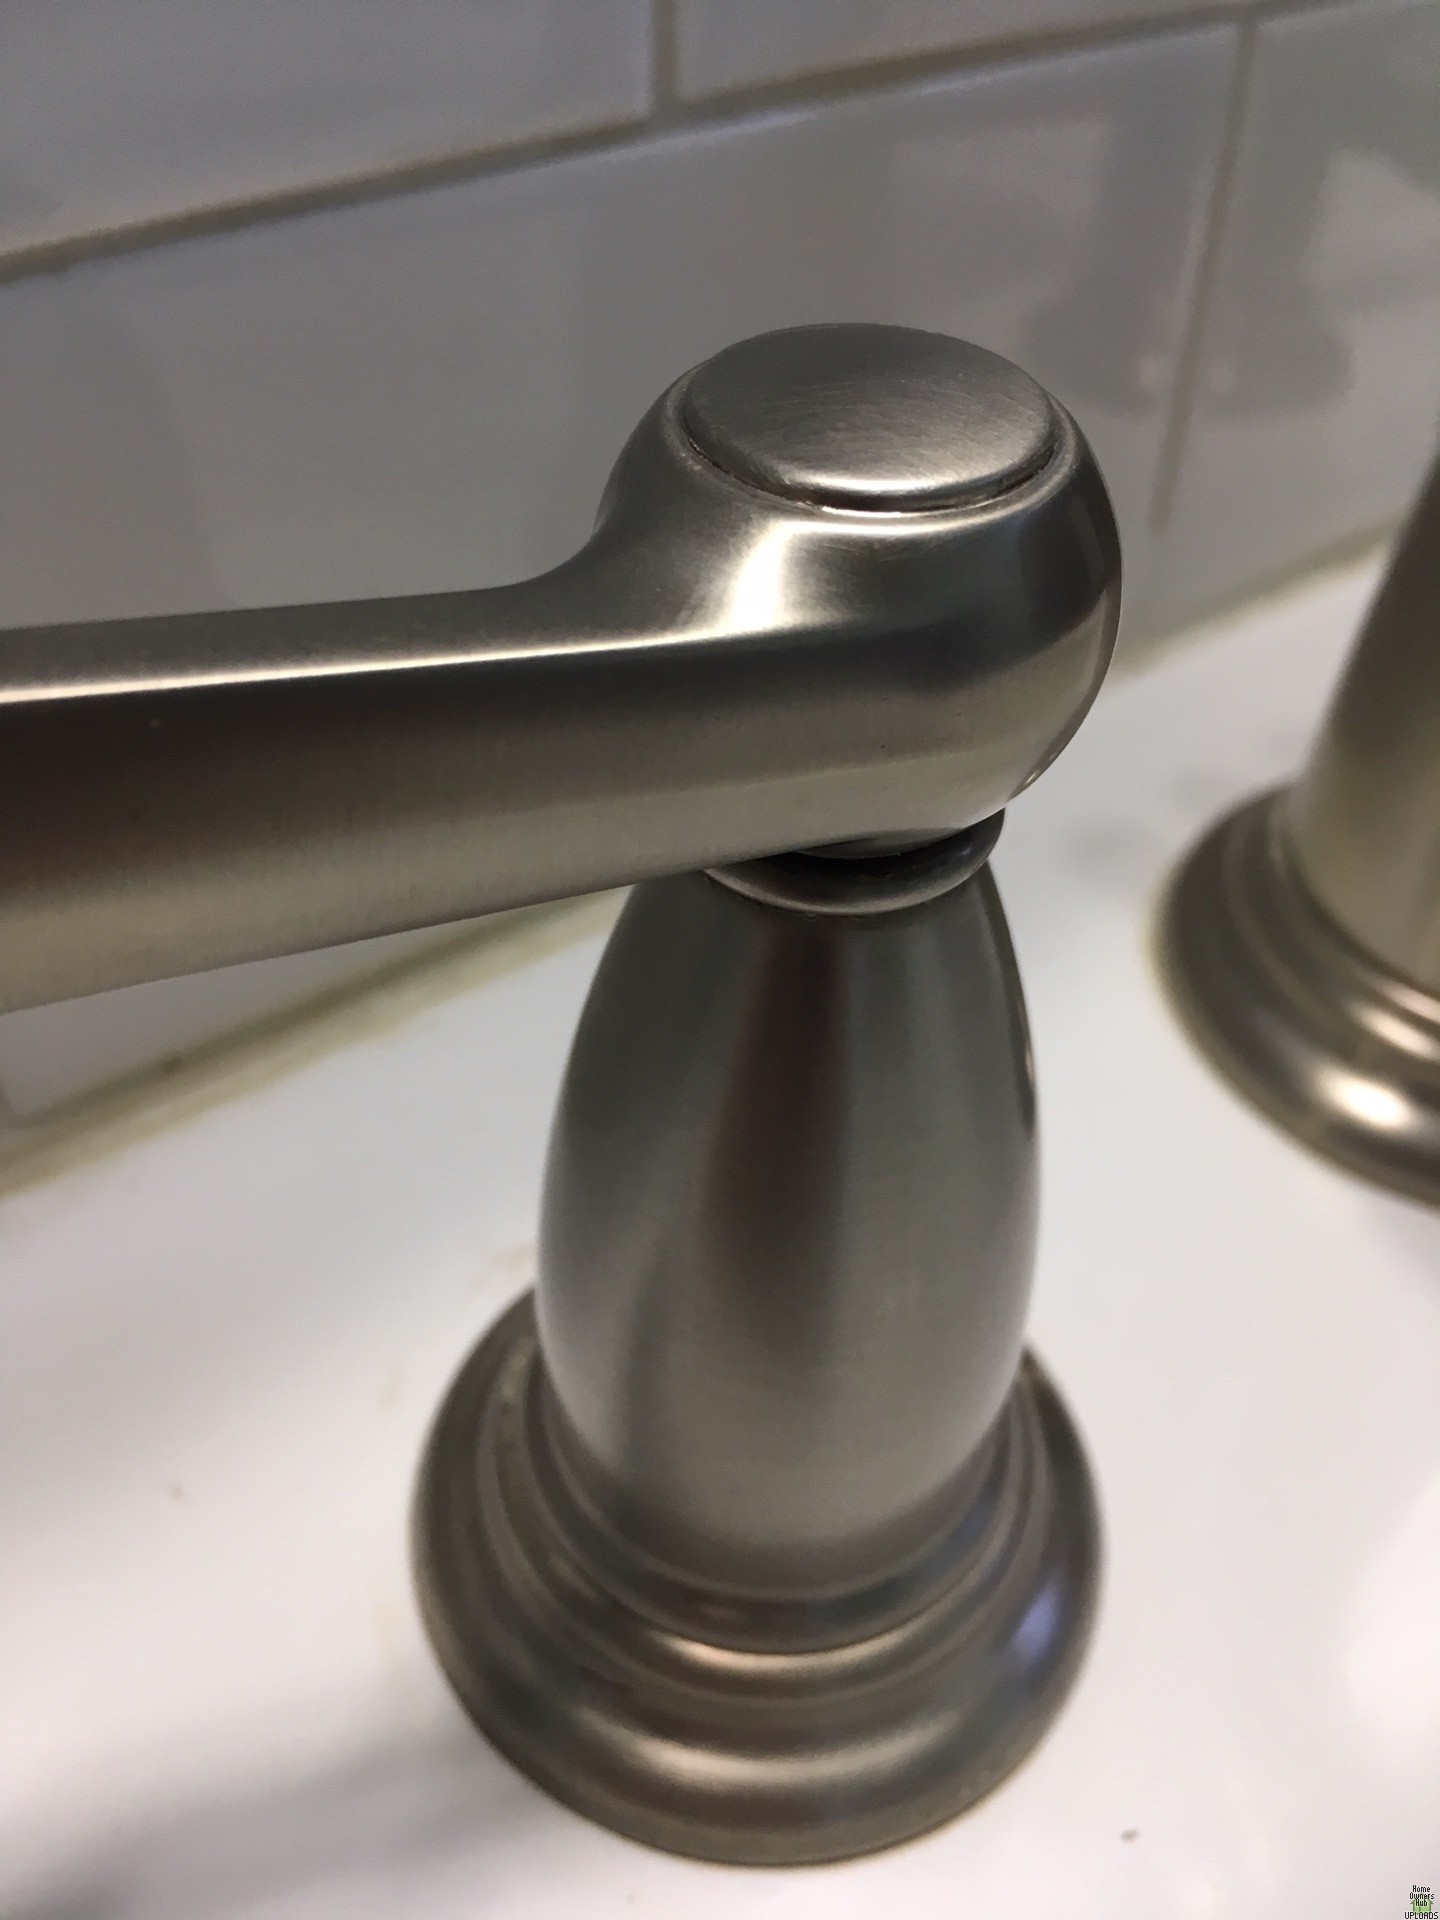 Image for Problem removing Grohe bathroom faucet handles (2023 Update)